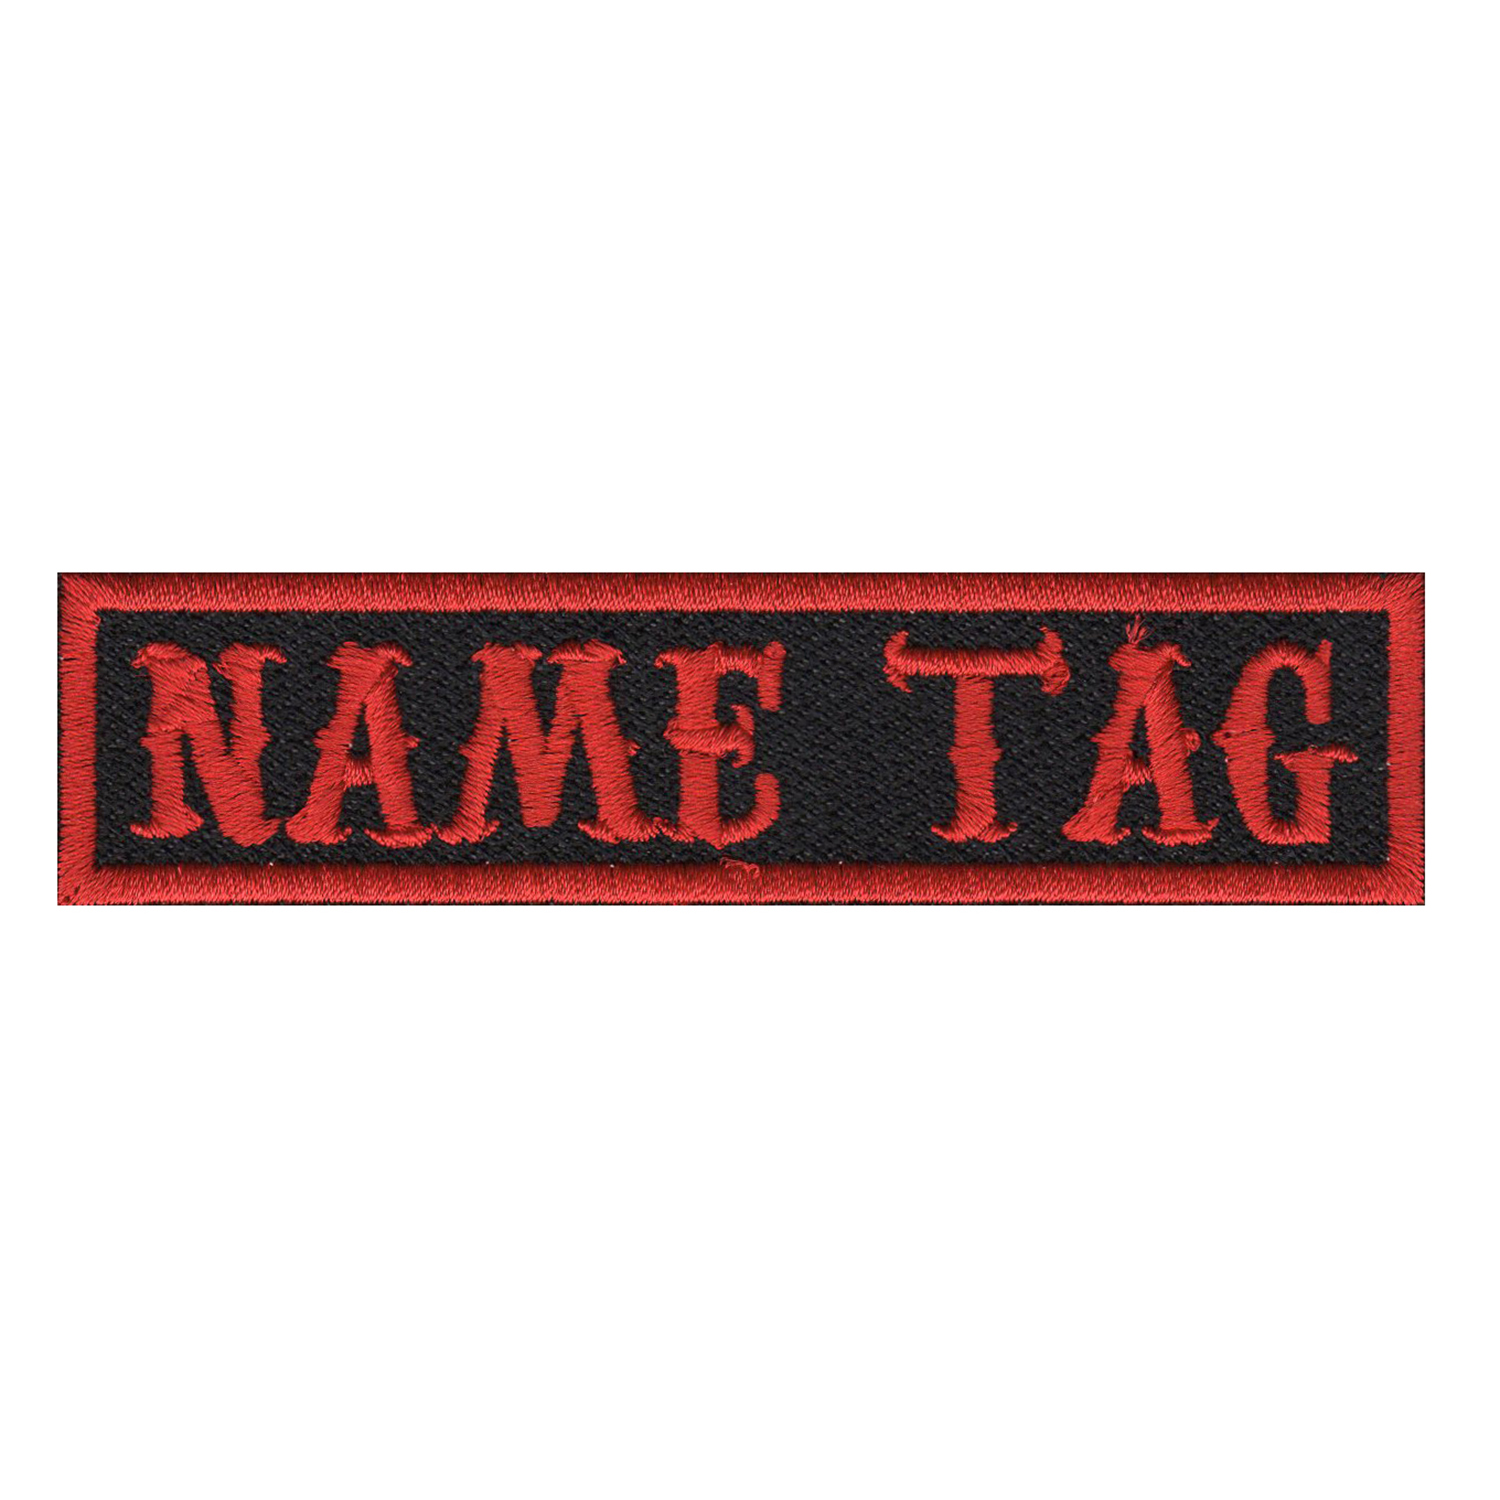 ALICE White on Black Iron on Name Tag Patch for Motorcycle Biker Vest NB268